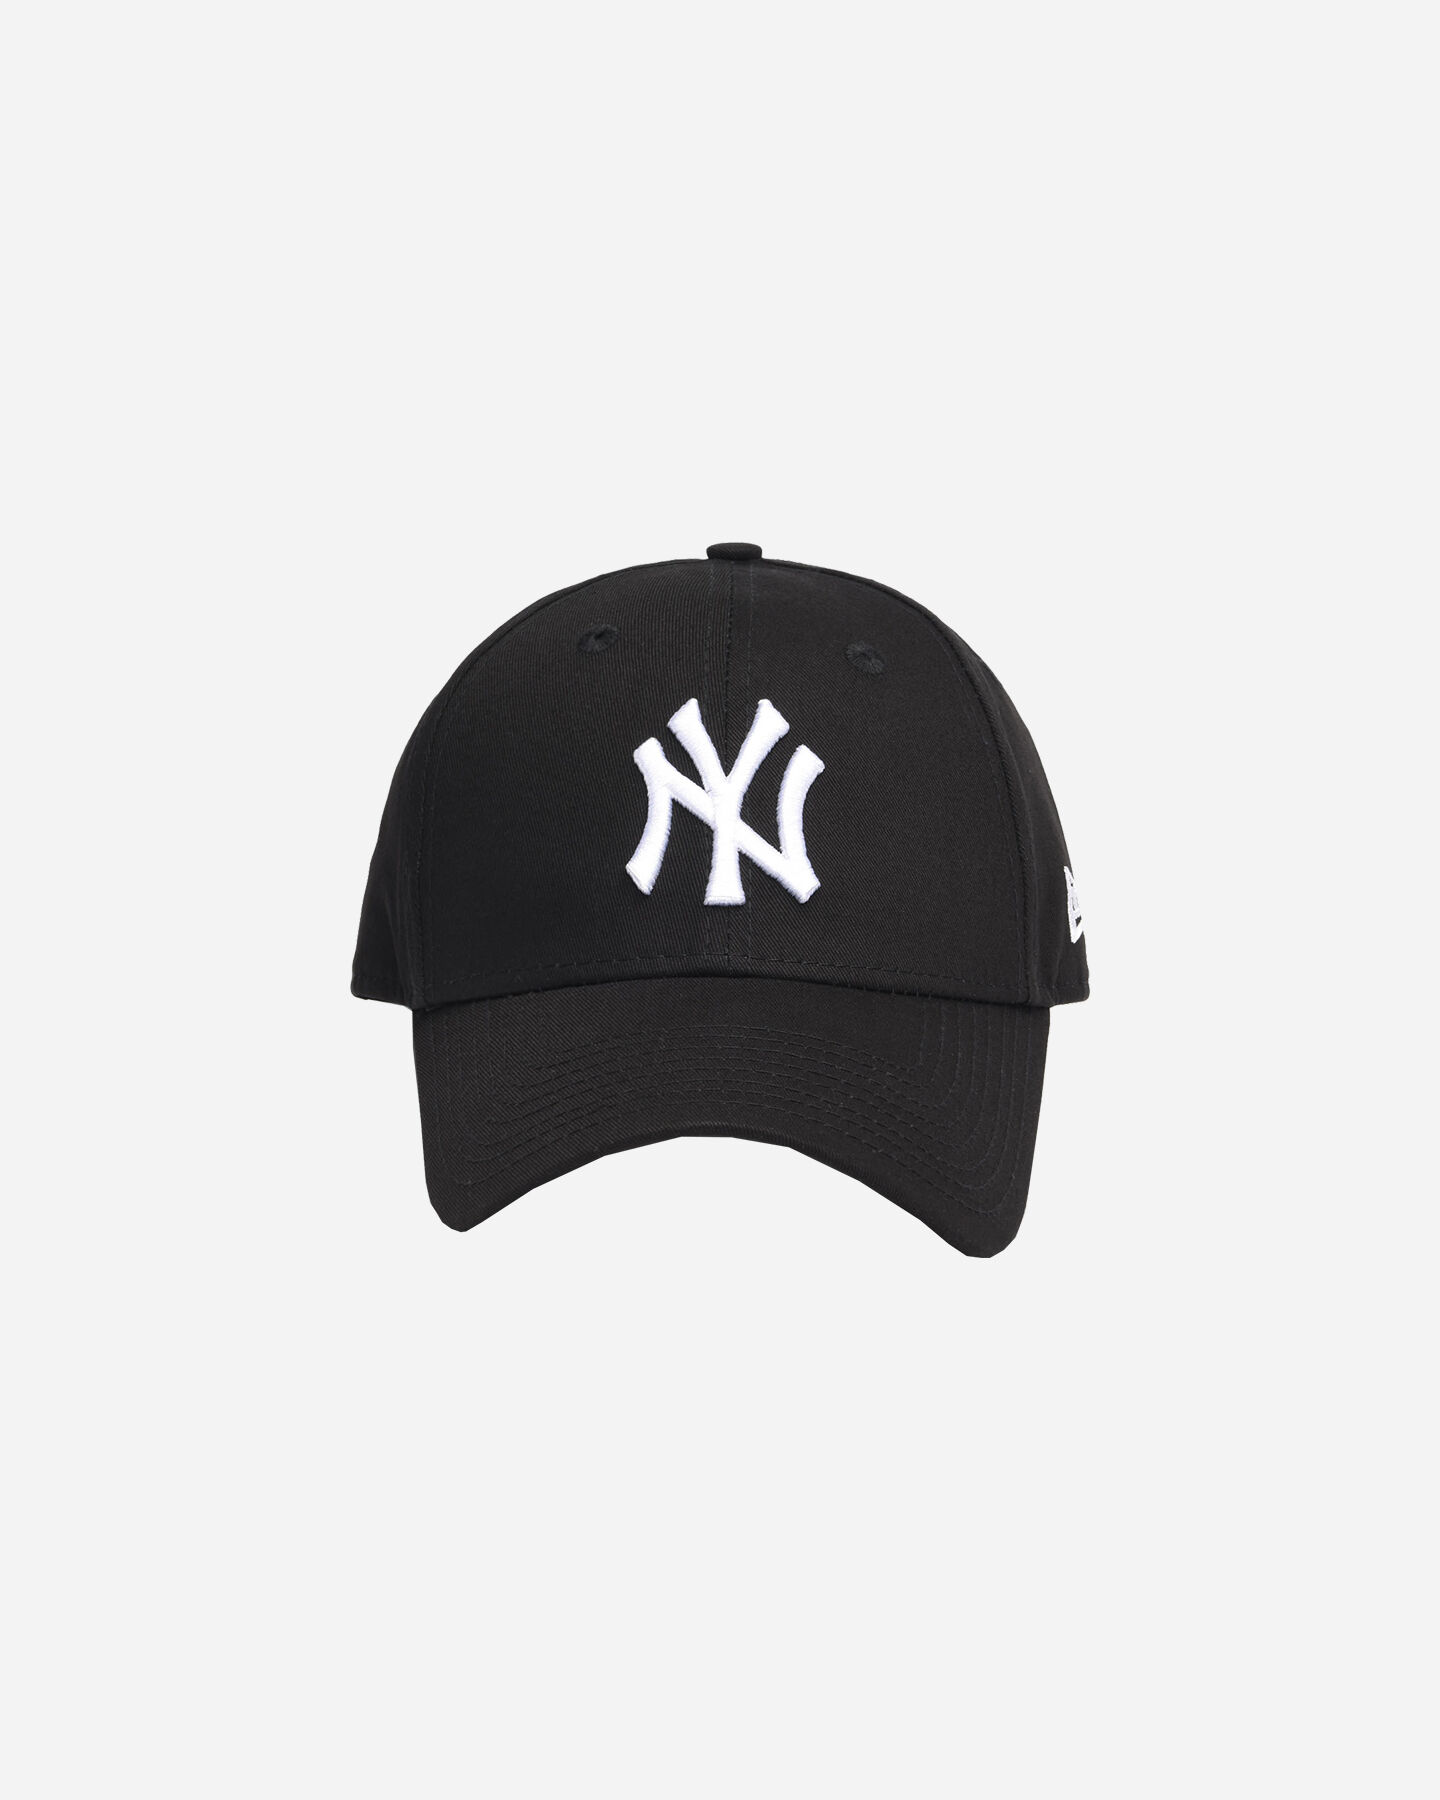  Cappellino NEW ERA 9FORTY LEAGUE NYY S1297083 scatto 1